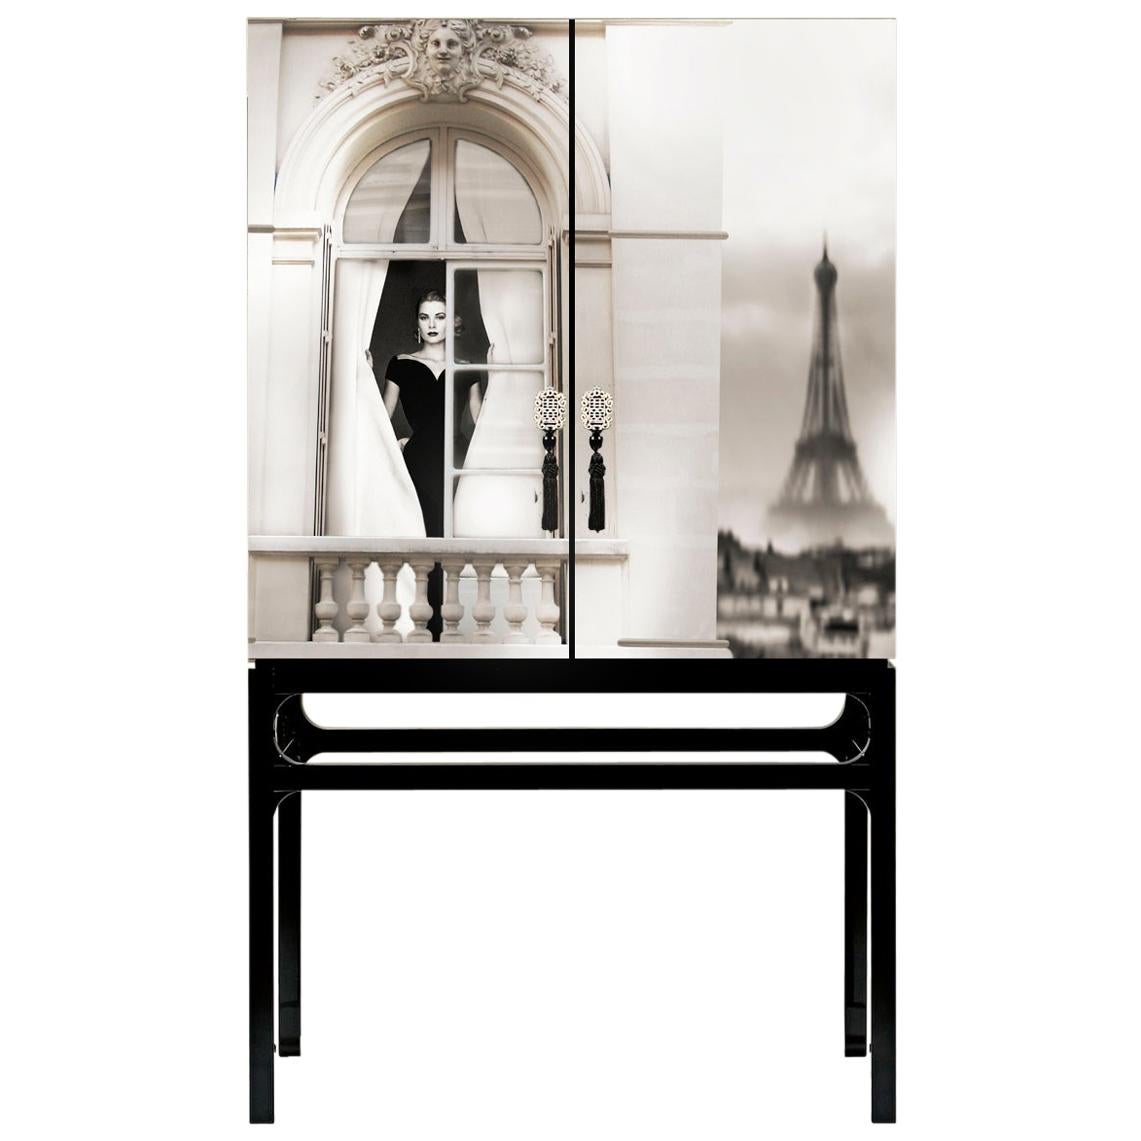 Rive Gauche Grace Kelly Cabinet with Artistic Intervention by Axel Crieger